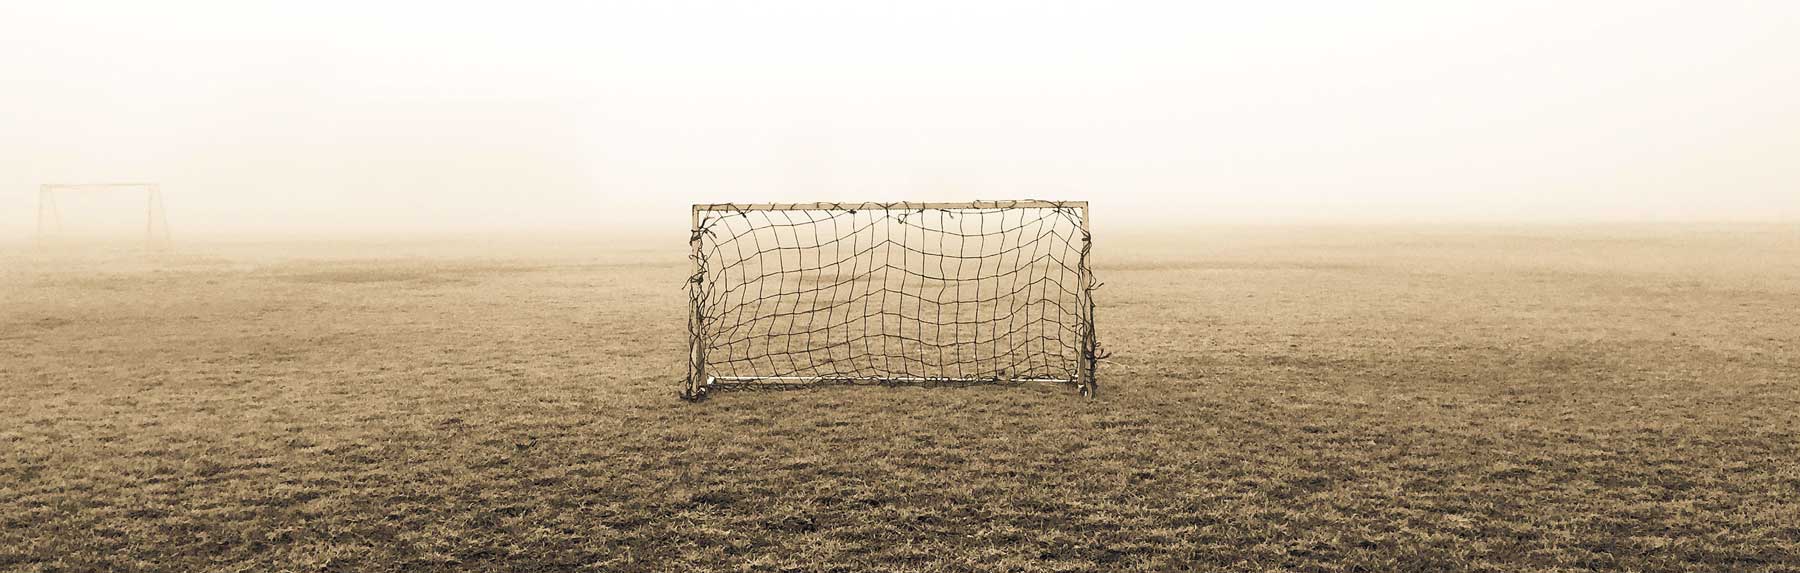 Old and ragged soccer goal. PVC goals can be unsafe for kids and players. There are rules you need to know about from FIFA and Australian government. Make sure you know about goal safety and dangers when purchasing soccer goals.